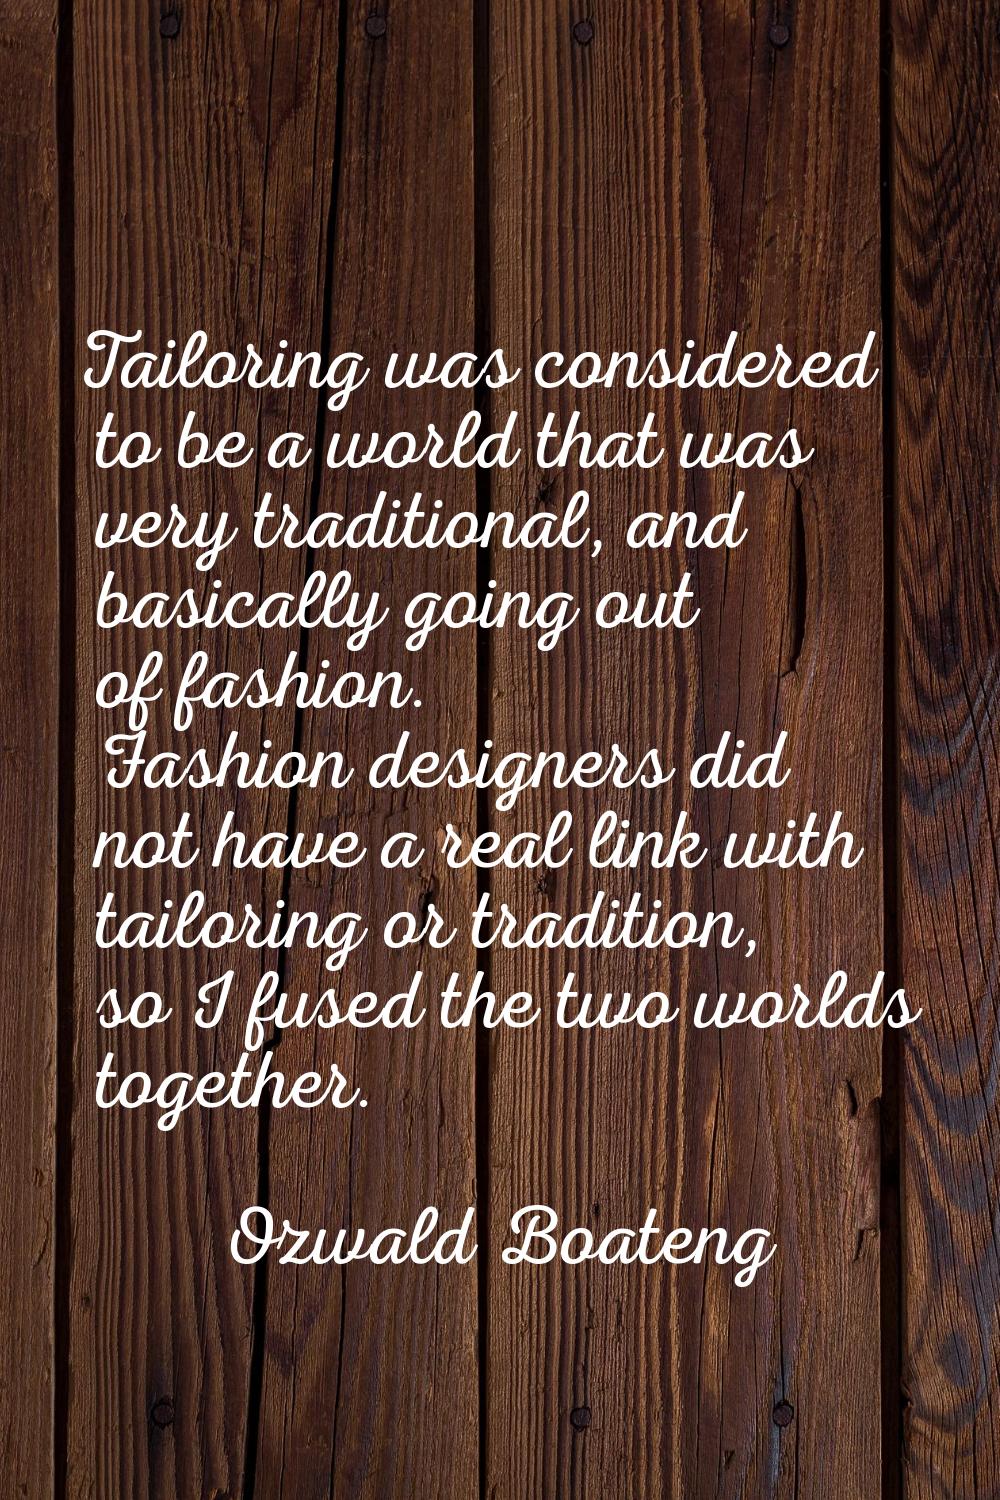 Tailoring was considered to be a world that was very traditional, and basically going out of fashio